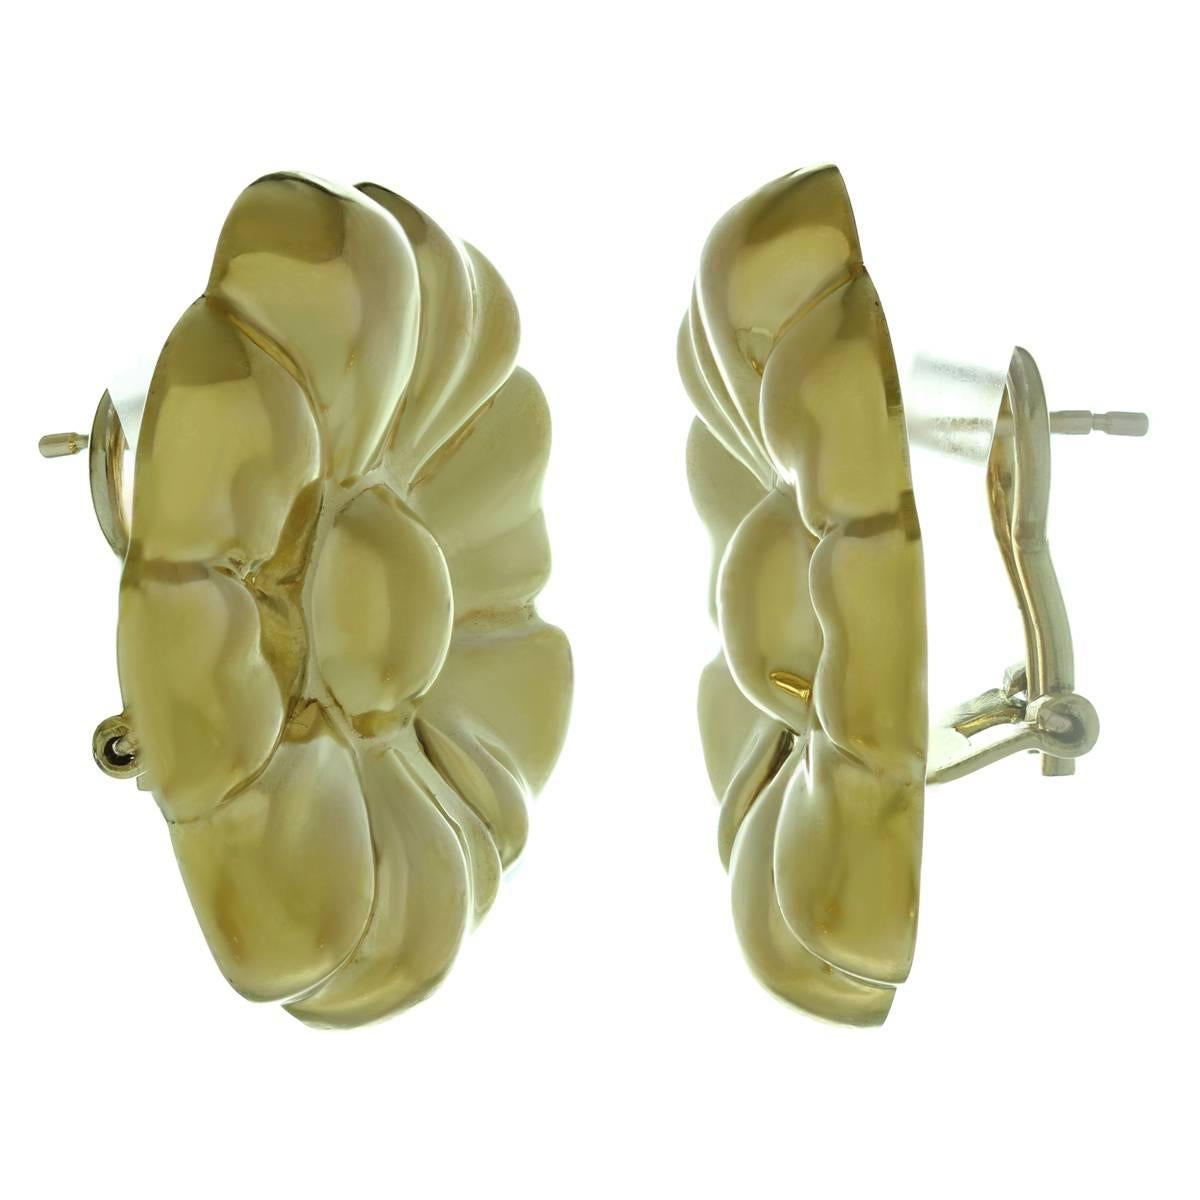 These fine Italian earrings are made in solid 14k yellow gold and feature a round floral design completed with lever backs. Measurements: 1.06